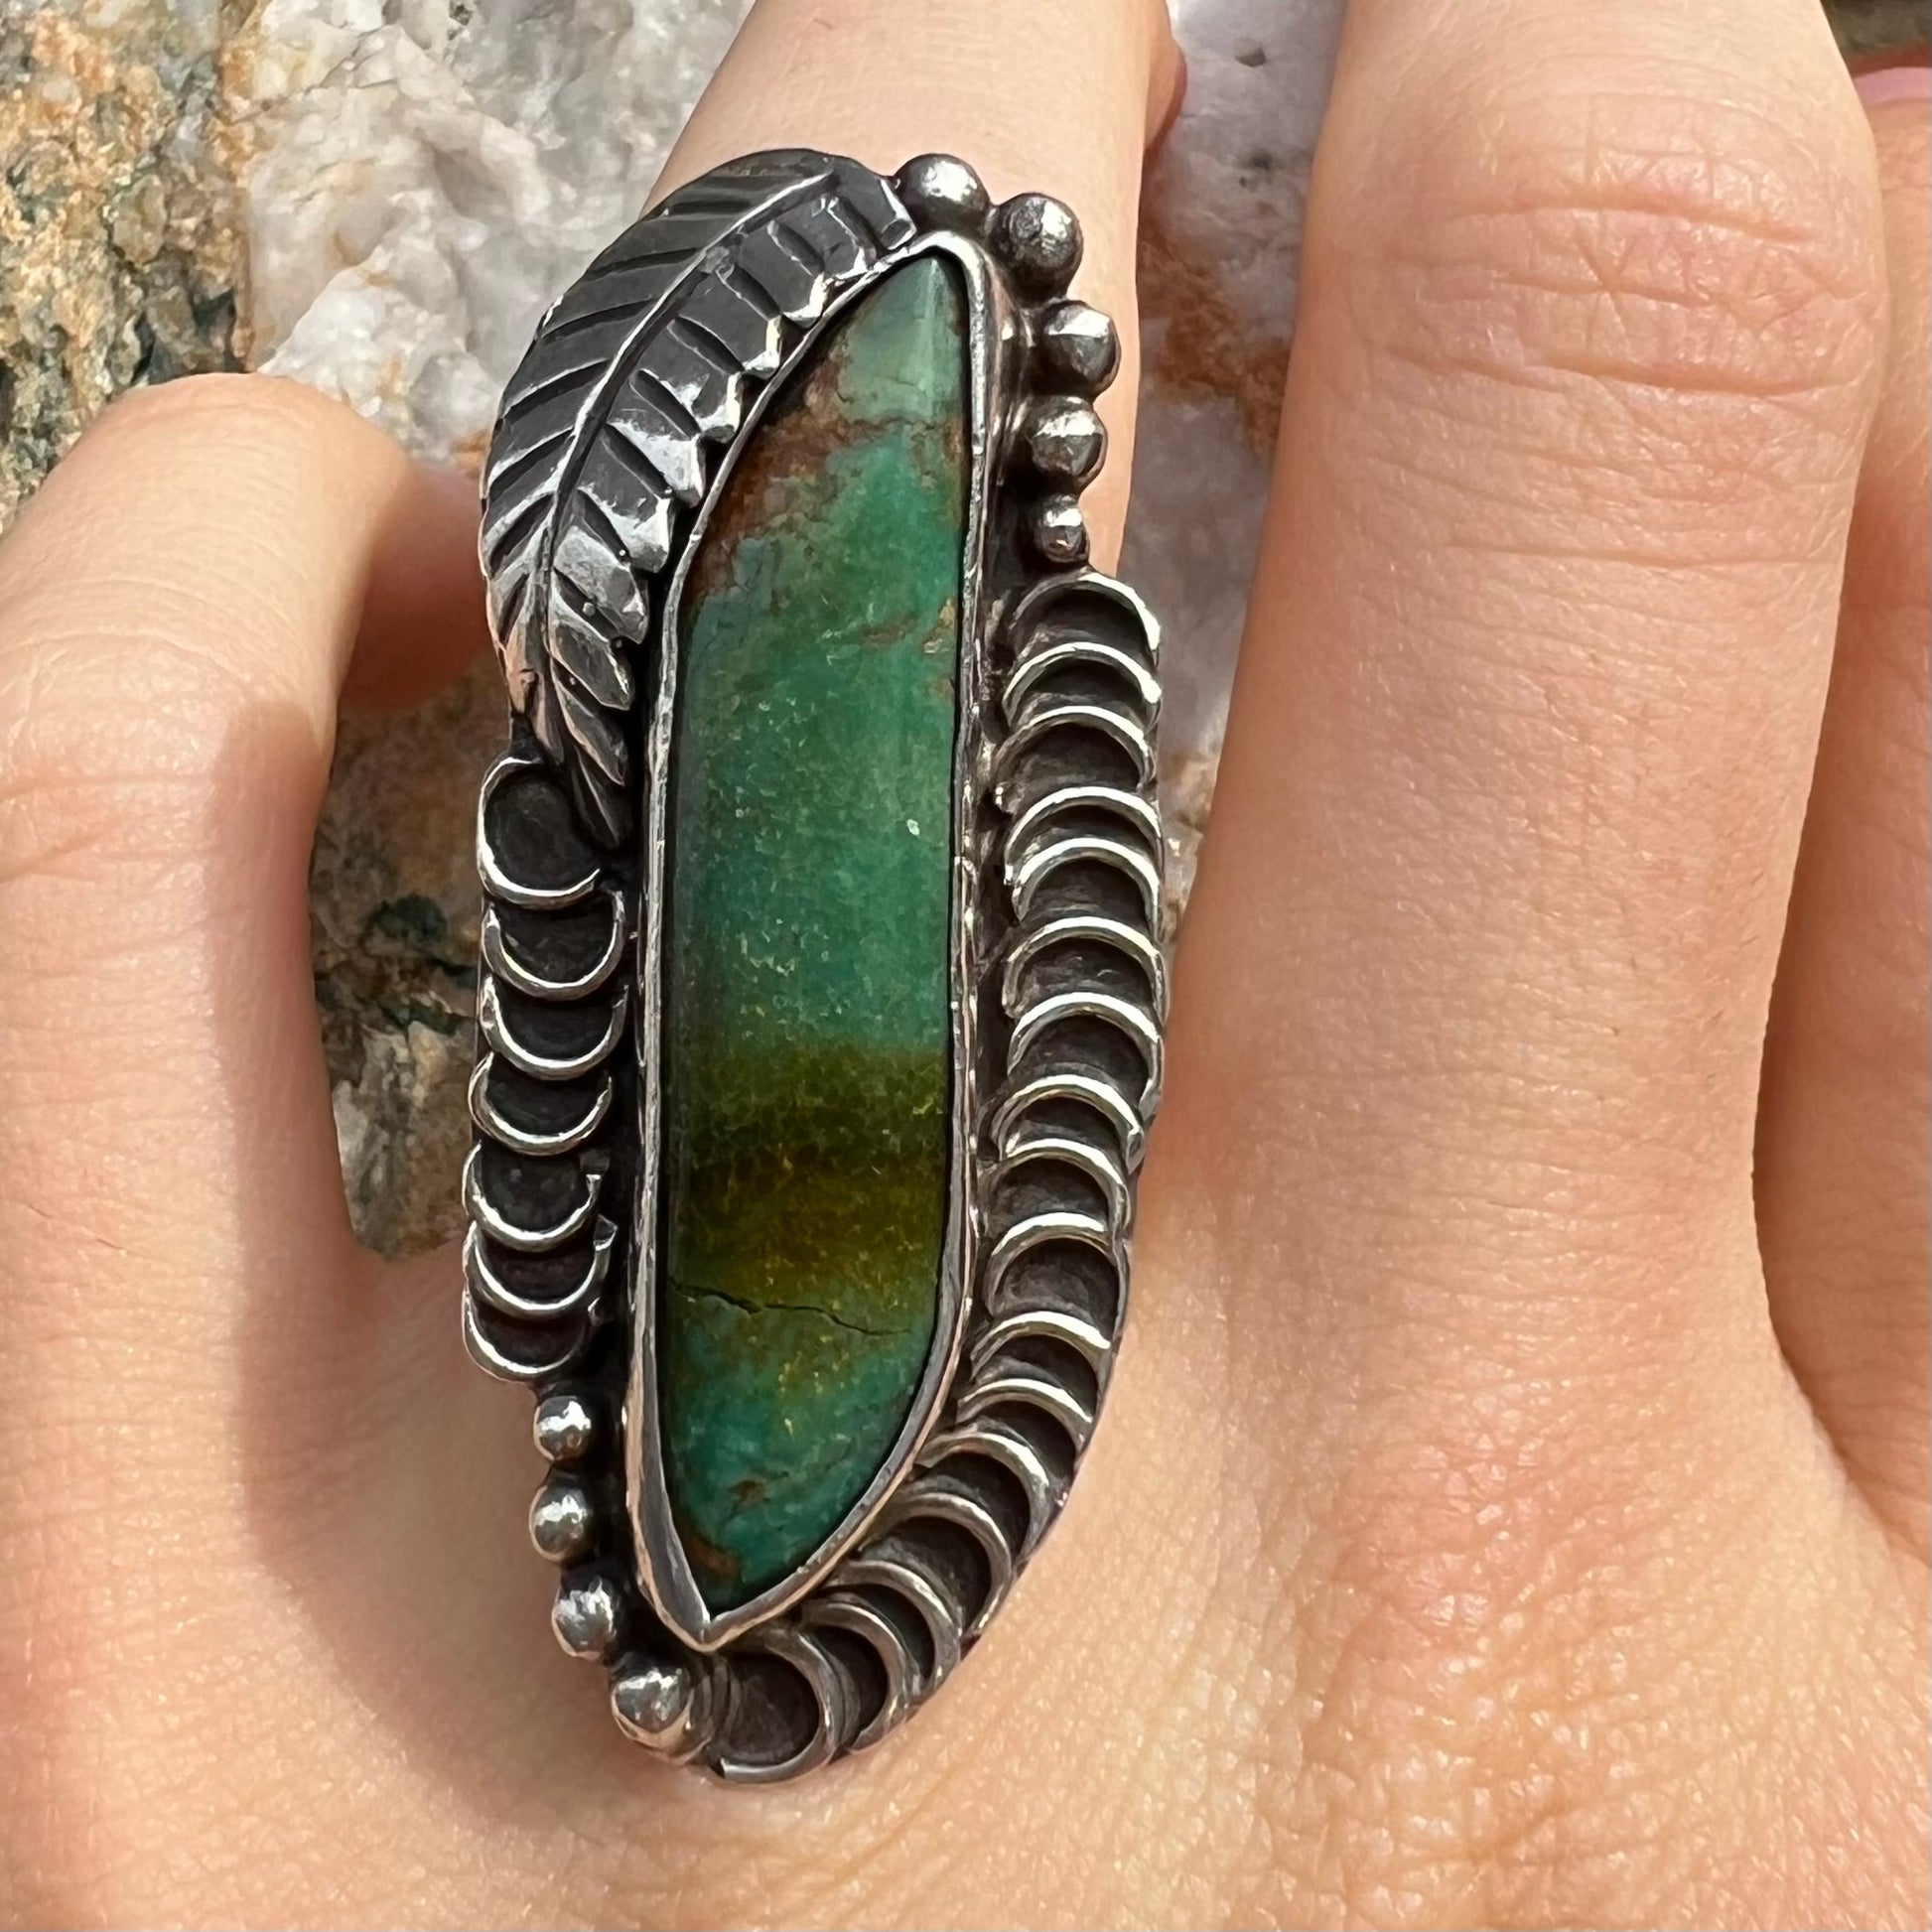 A sterling silver Navajo style ring set with a turquoise stone that shows colors of green, yellow, and reddish brown.